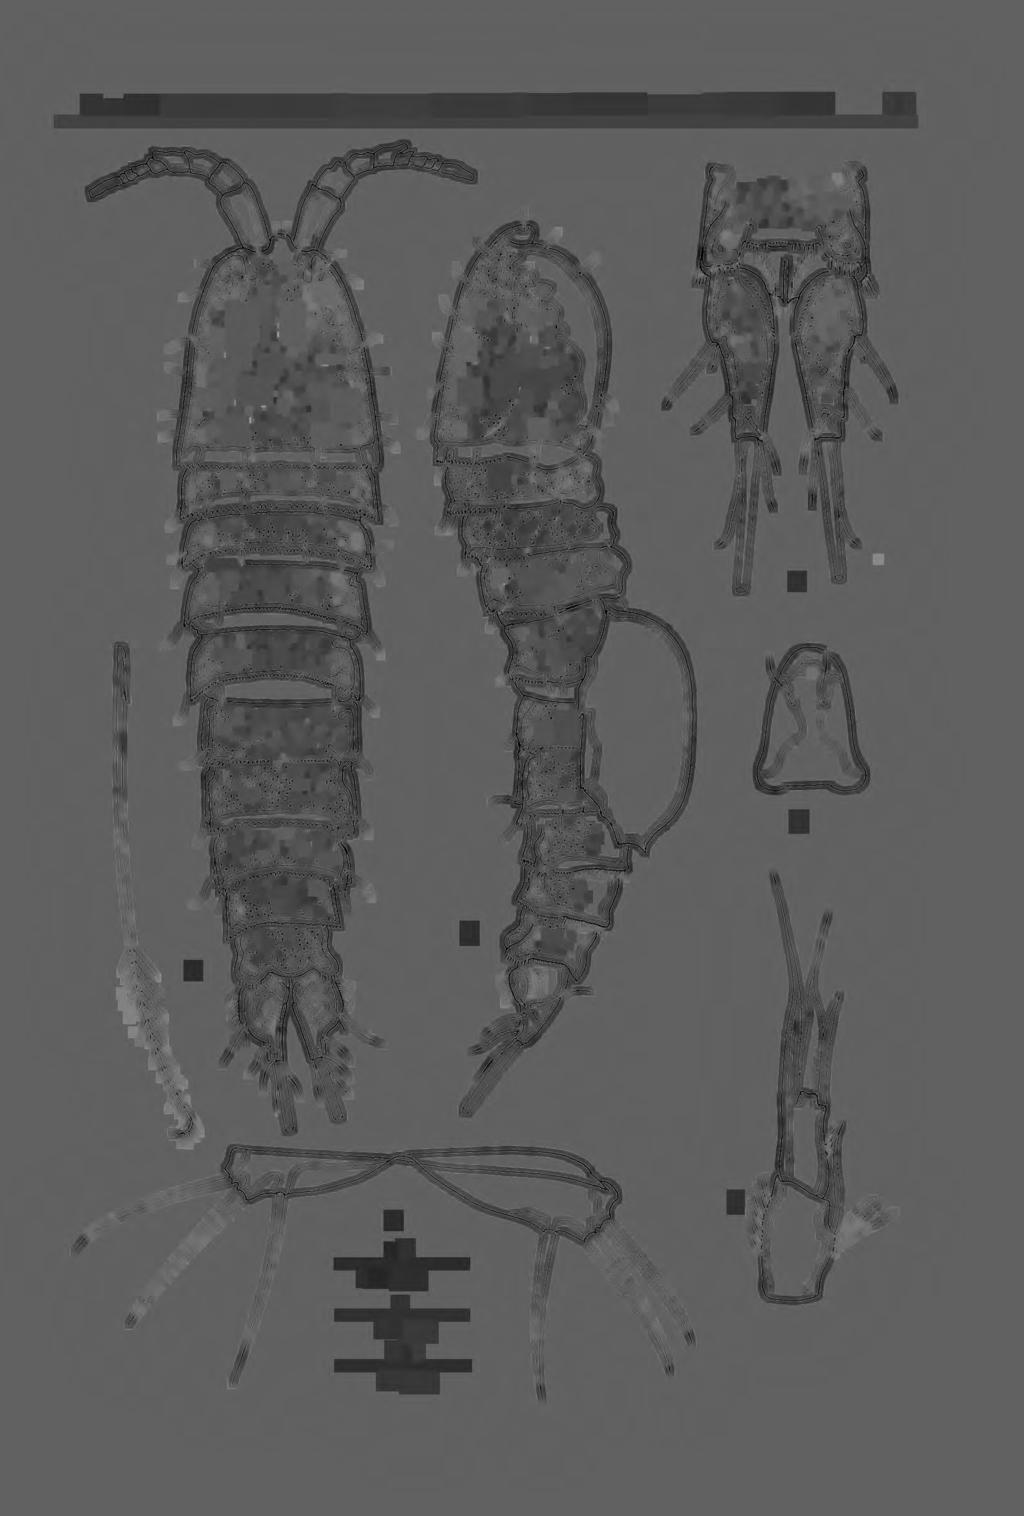 New and interesting copepods